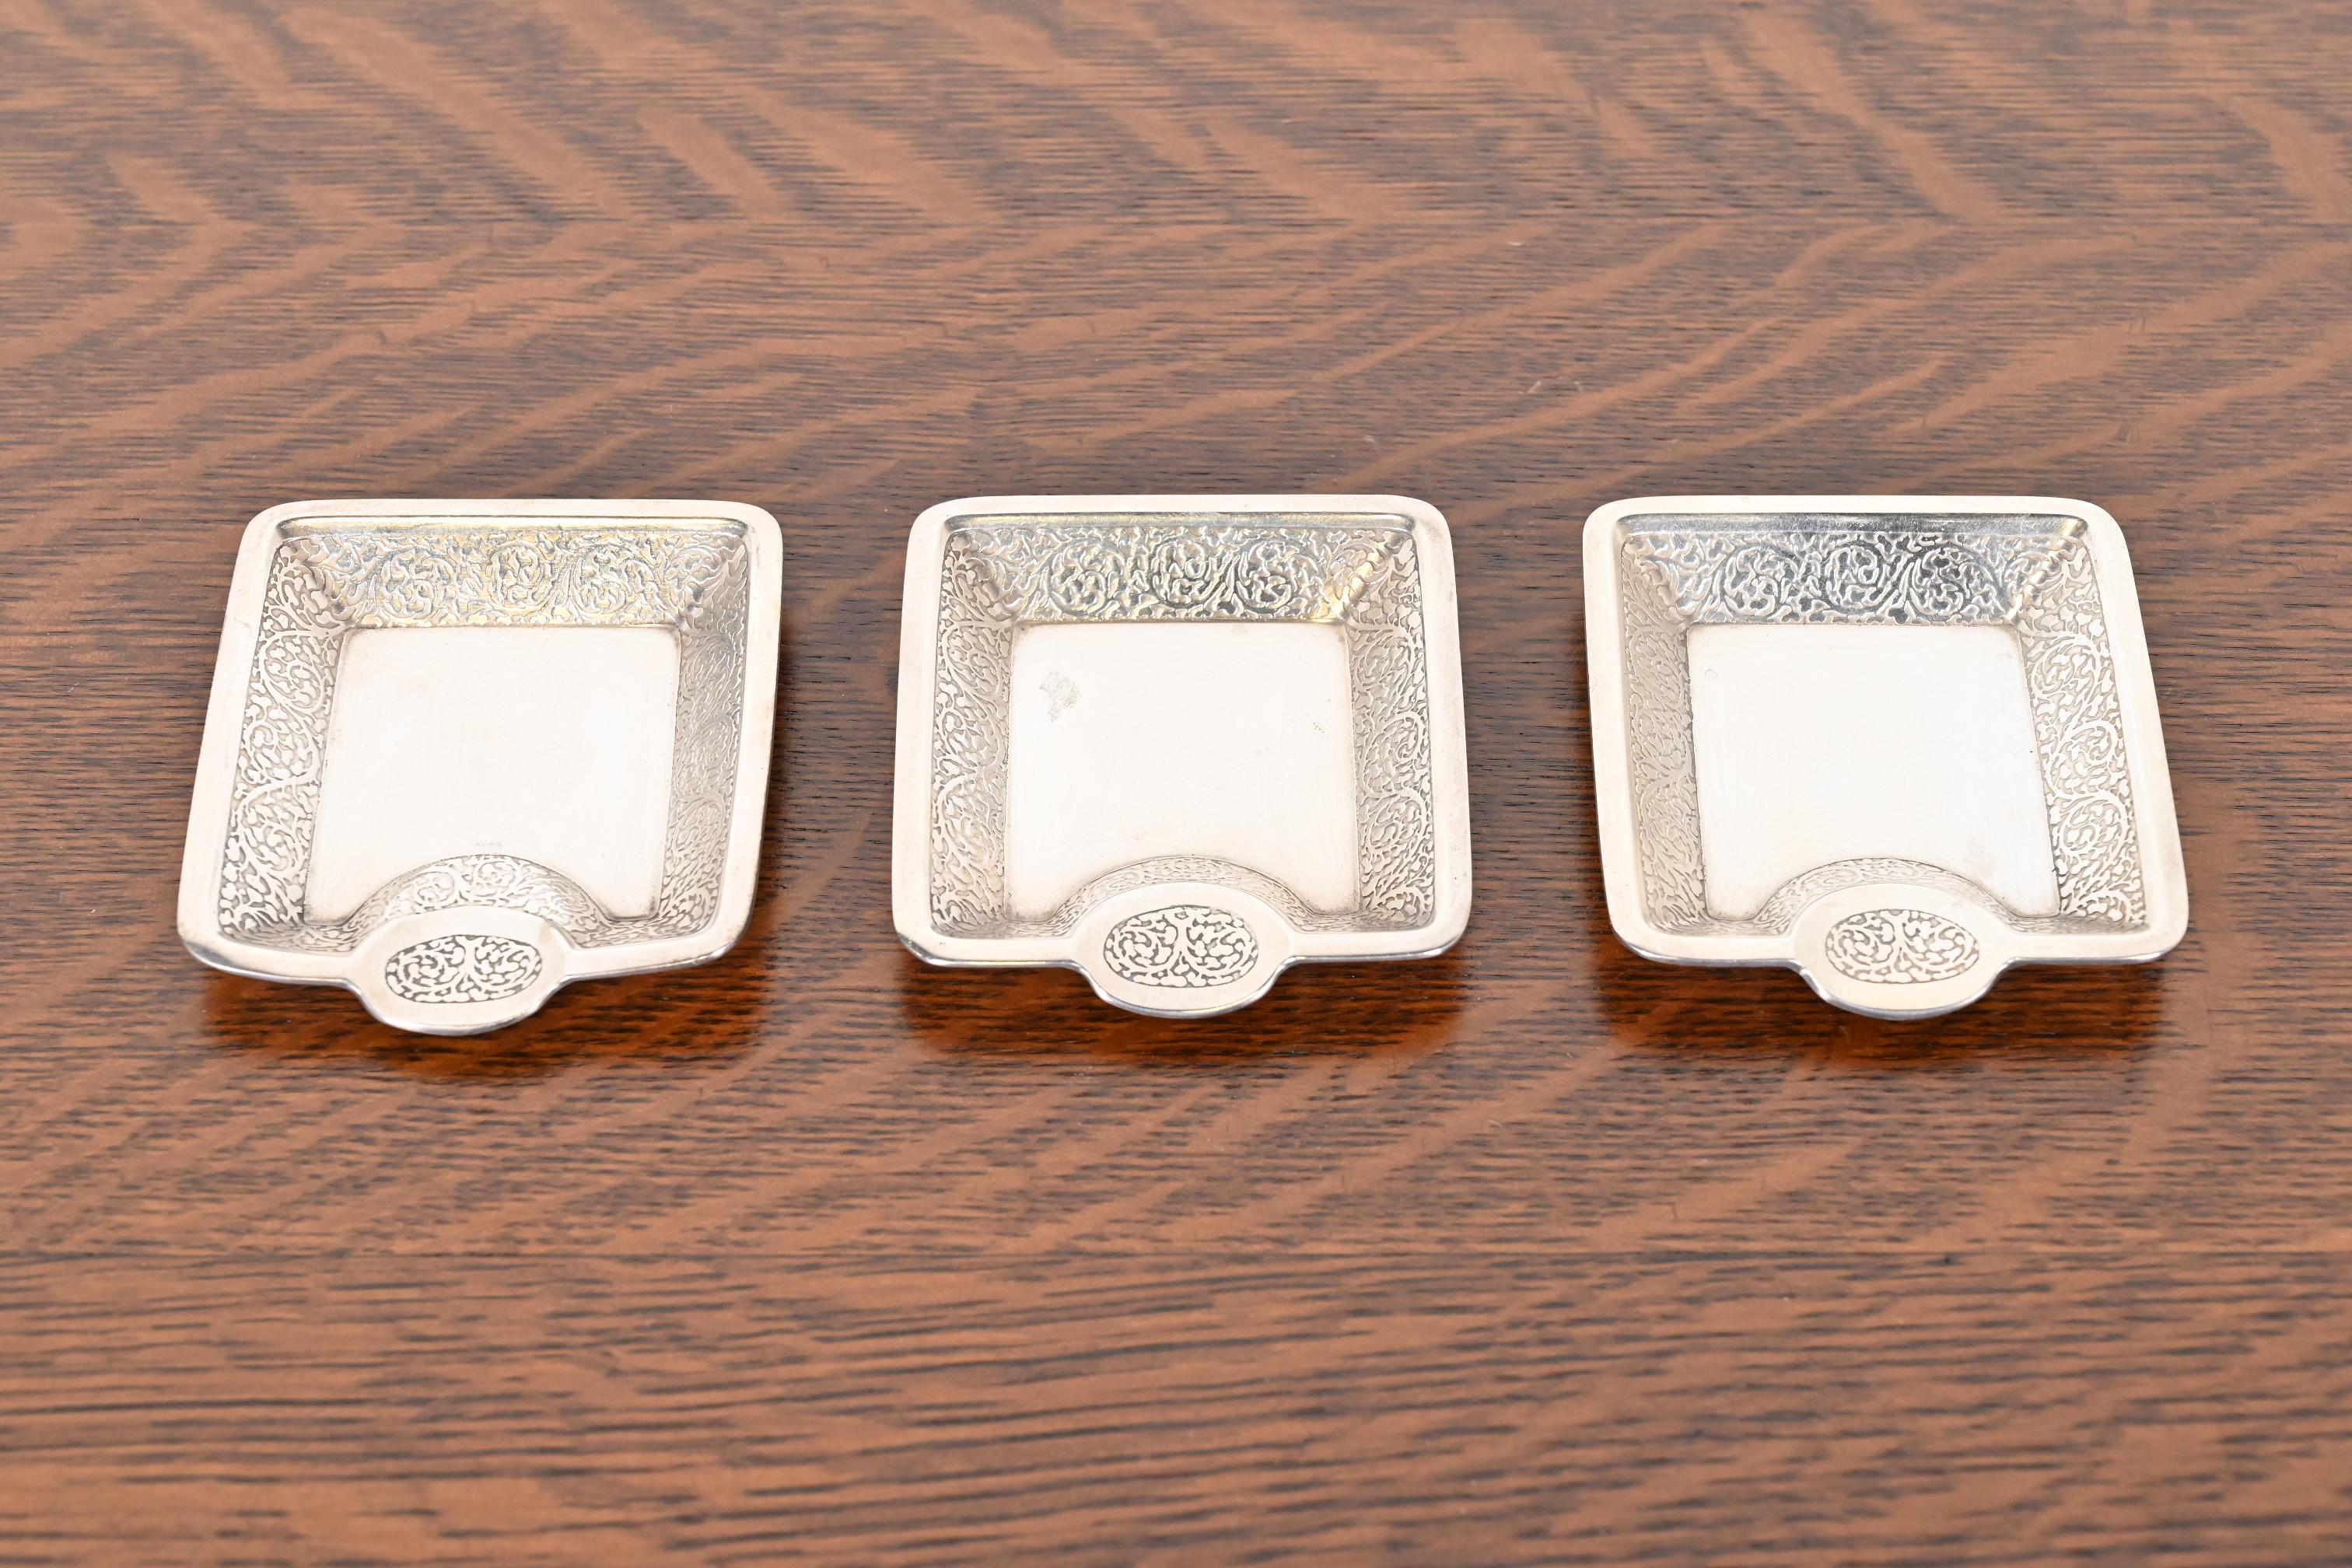 A gorgeous set of three antique sterling silver ashtrays or catchall trays

By Tiffany & Co. (signed to the underside)

USA, Circa Early 20th Century

Each measures: 3.25